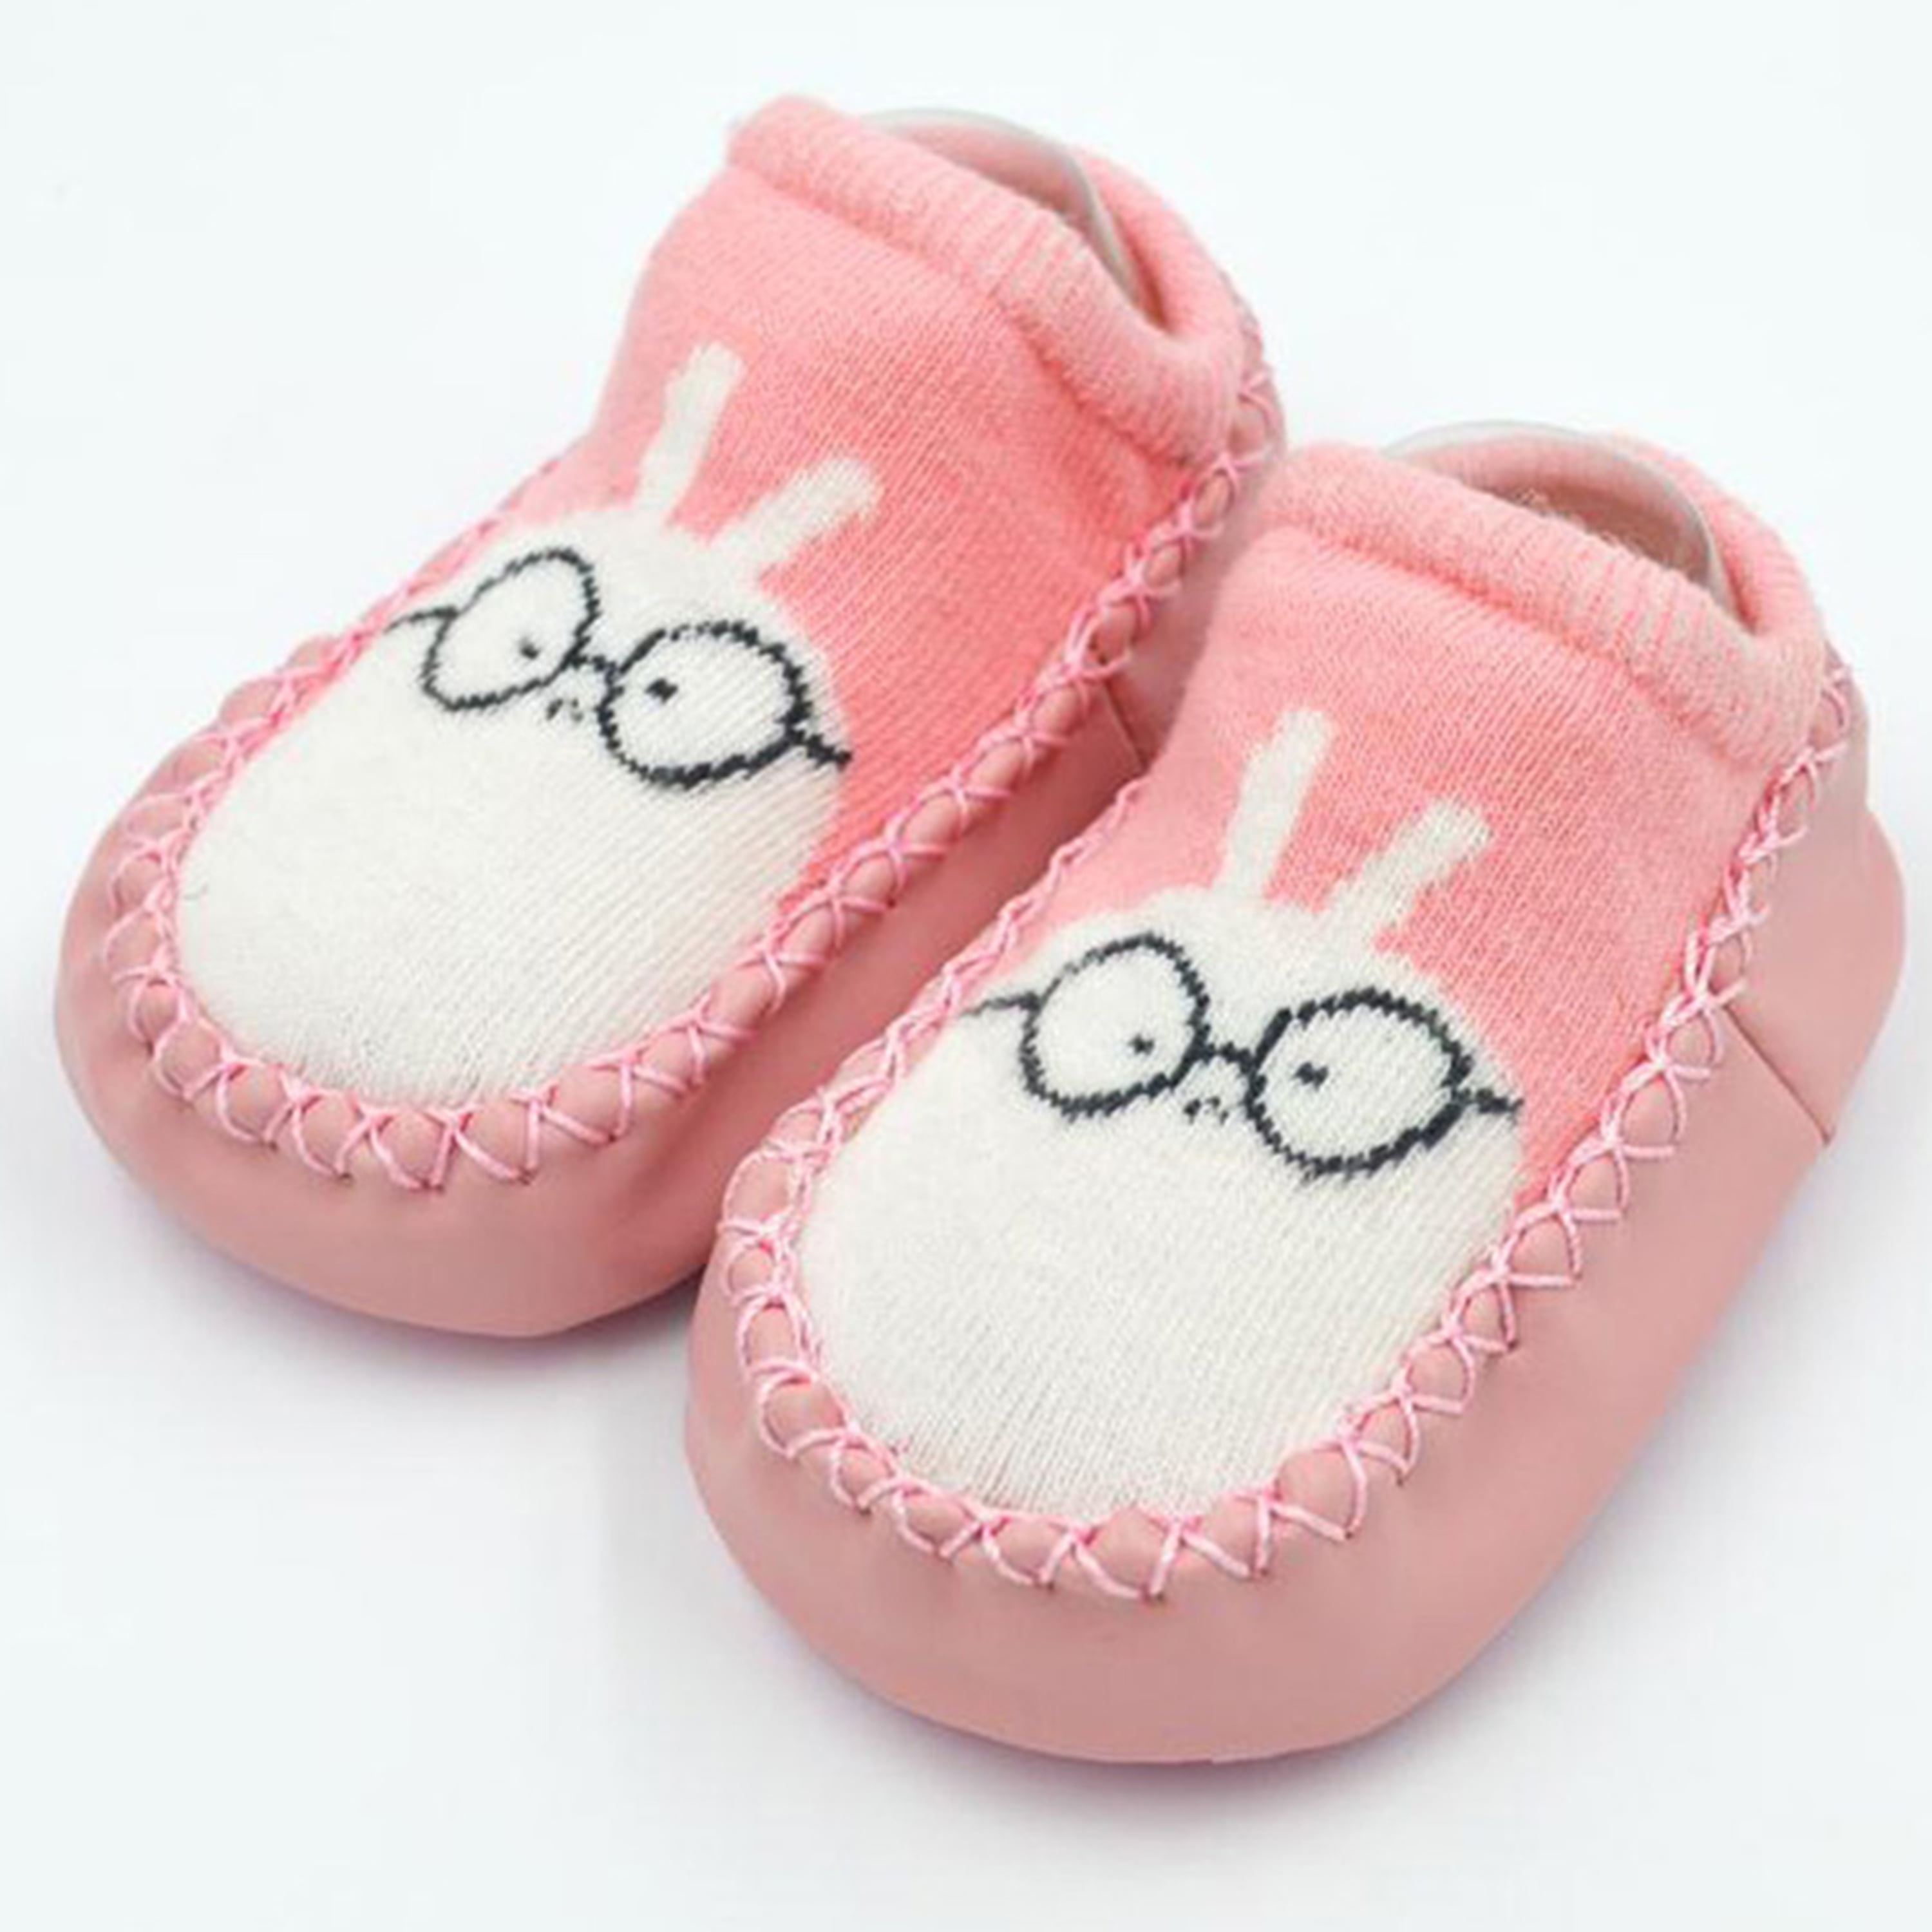 Infant Baby Girls Boys Slippers Socks Stay-on Moccasins Toddler Floor shoes USA 